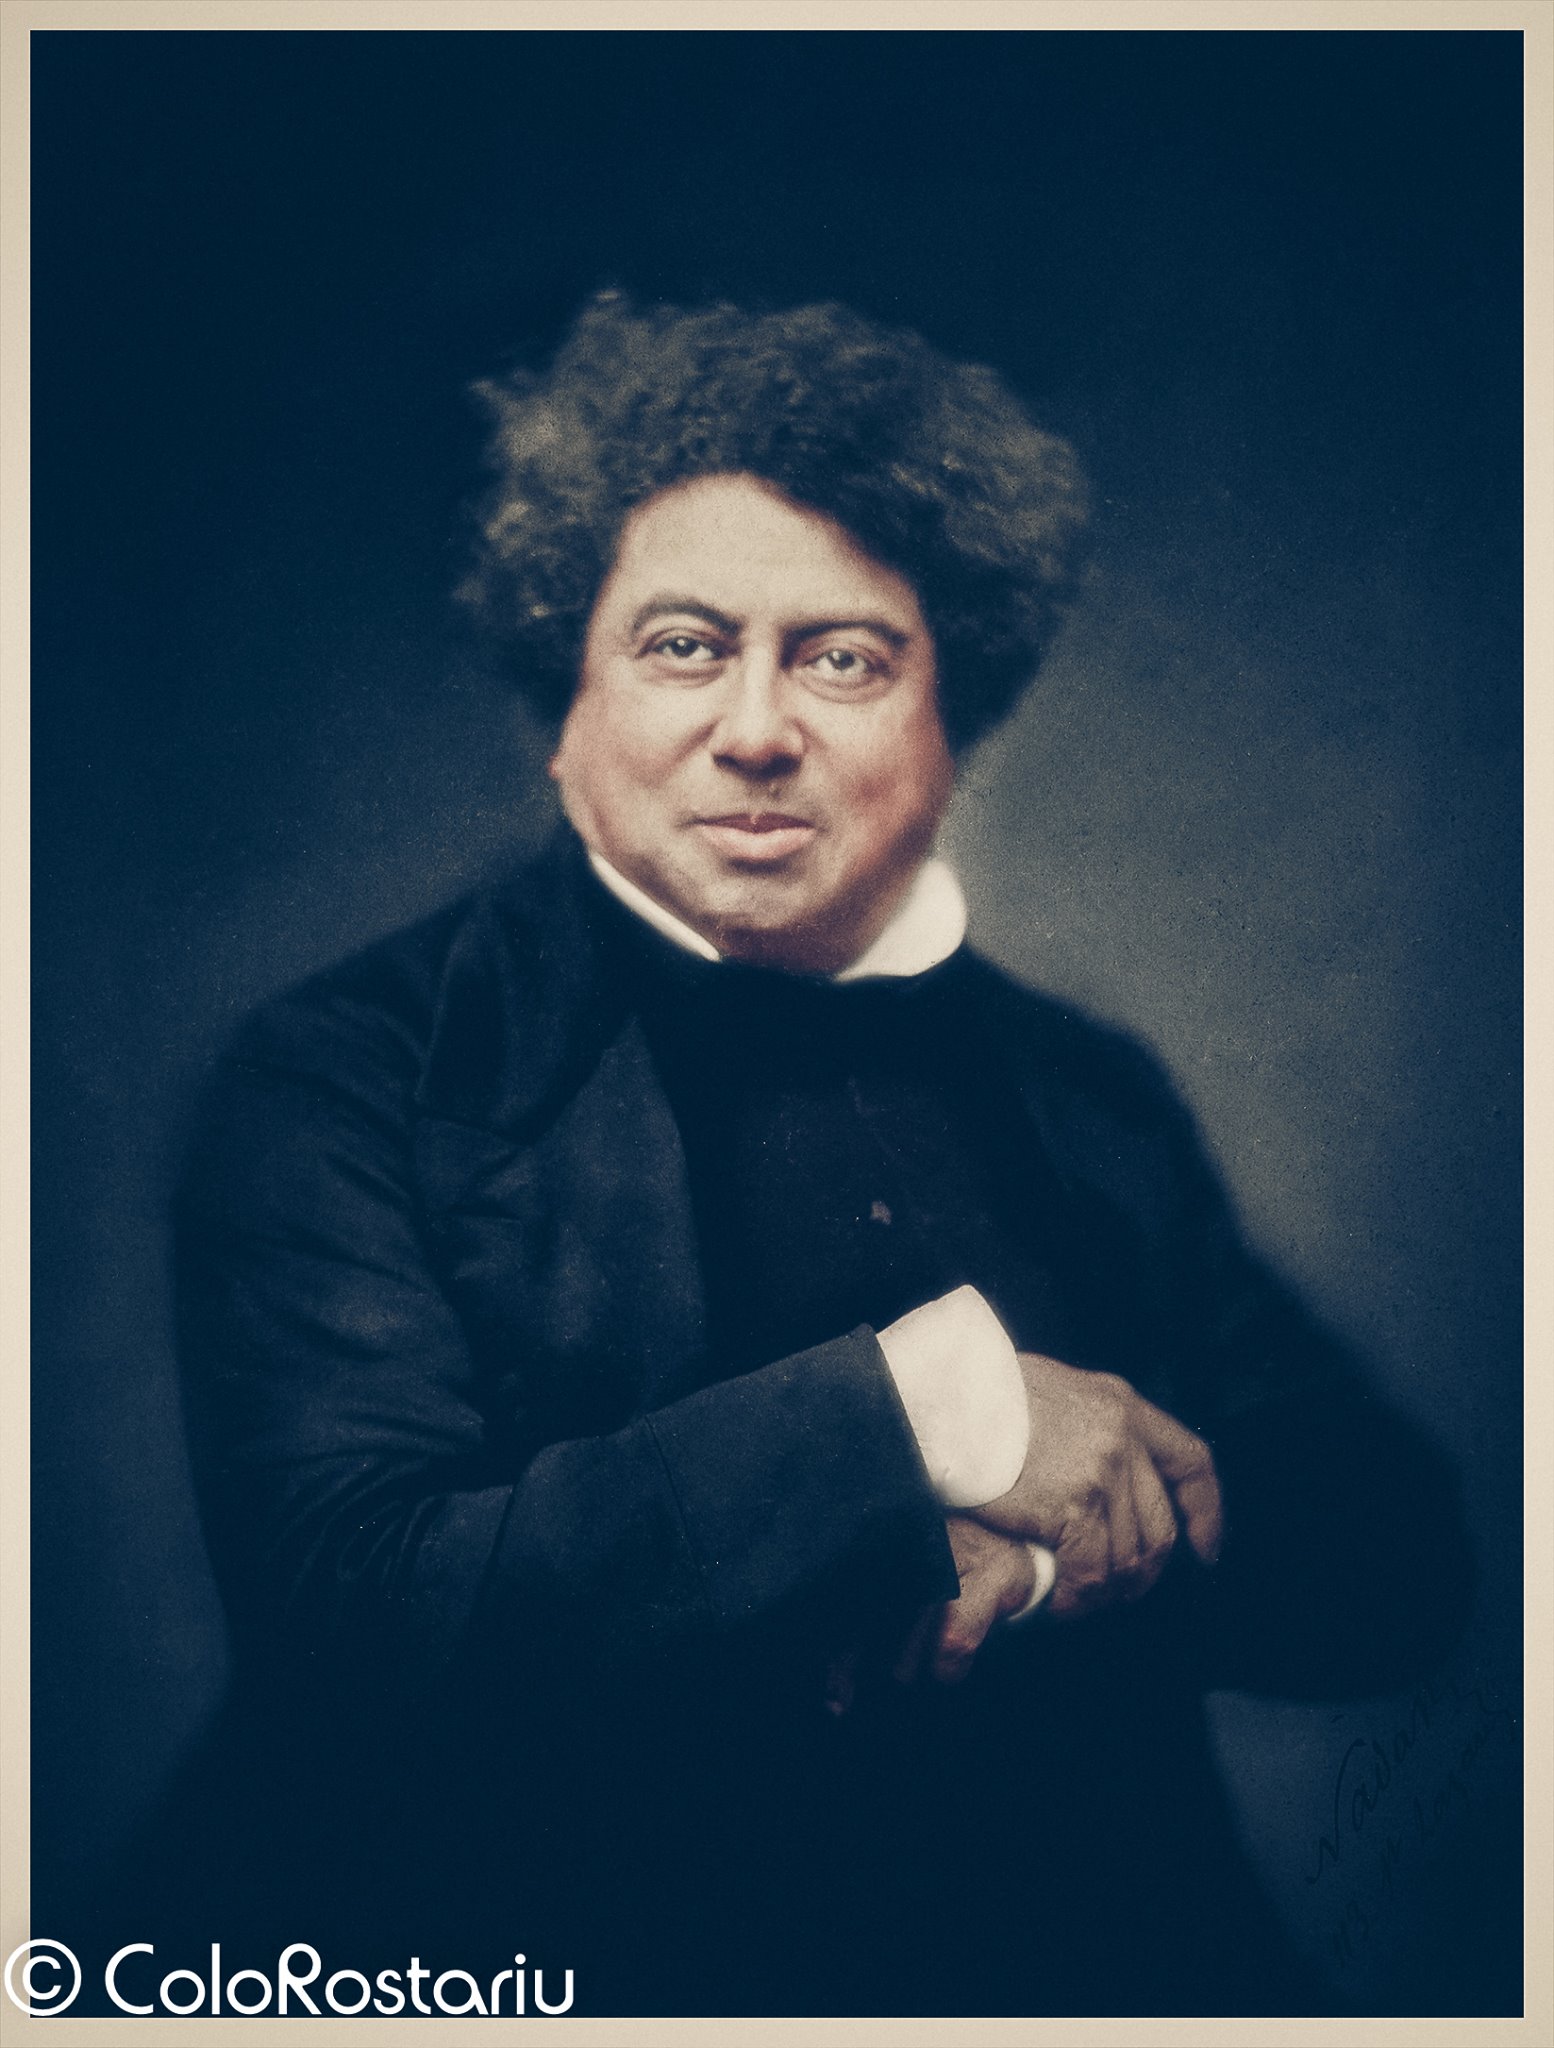 alexandre-dumas-the-count-of-monte-cristo-the-three-musketeers-twenty-years-after-the-vicomte-de-bragelonne-ten-years-later.jpg